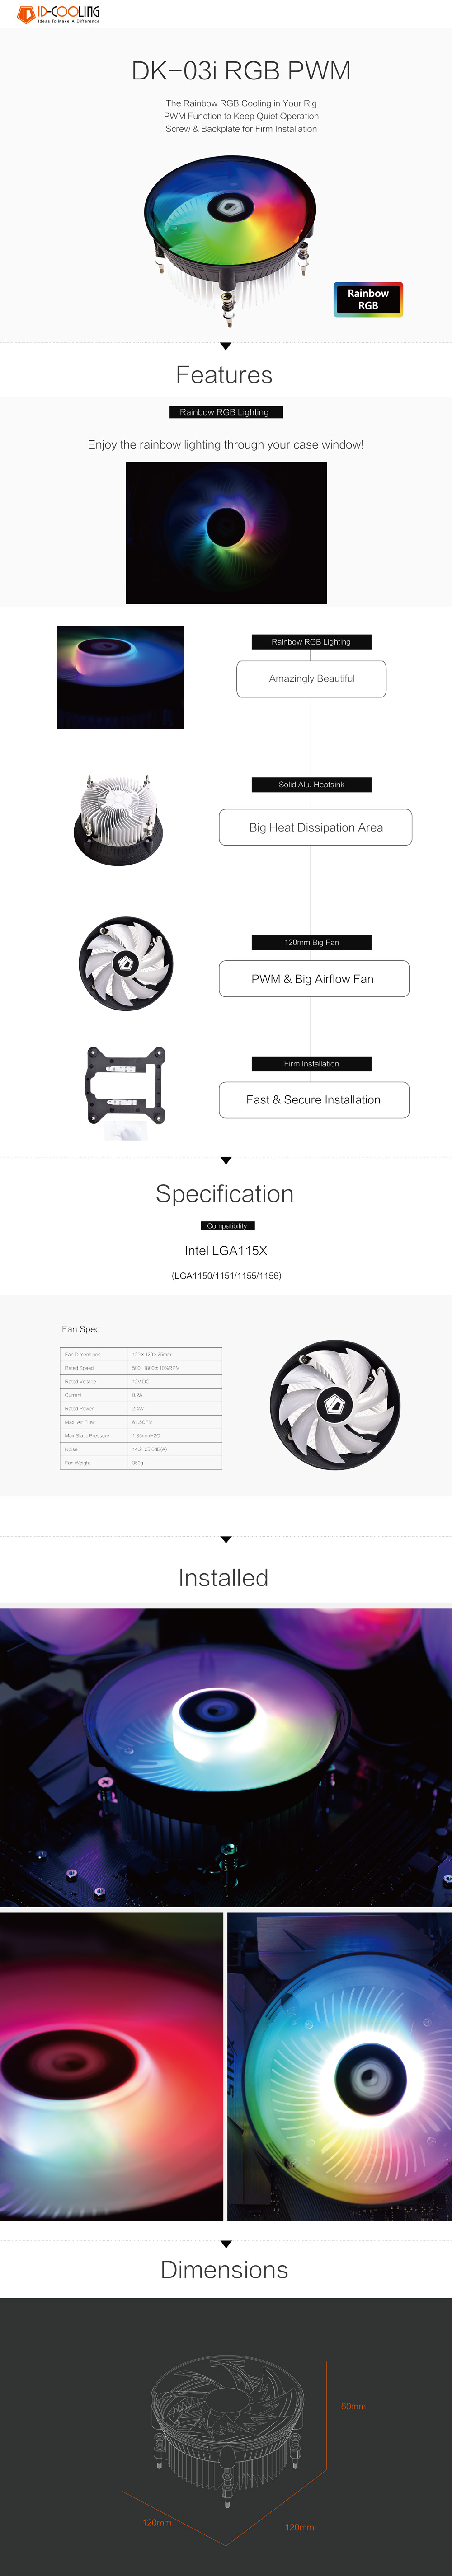 A large marketing image providing additional information about the product ID-COOLING Denmark Series DK-03i RGB PWM Intel CPU Cooler - Additional alt info not provided